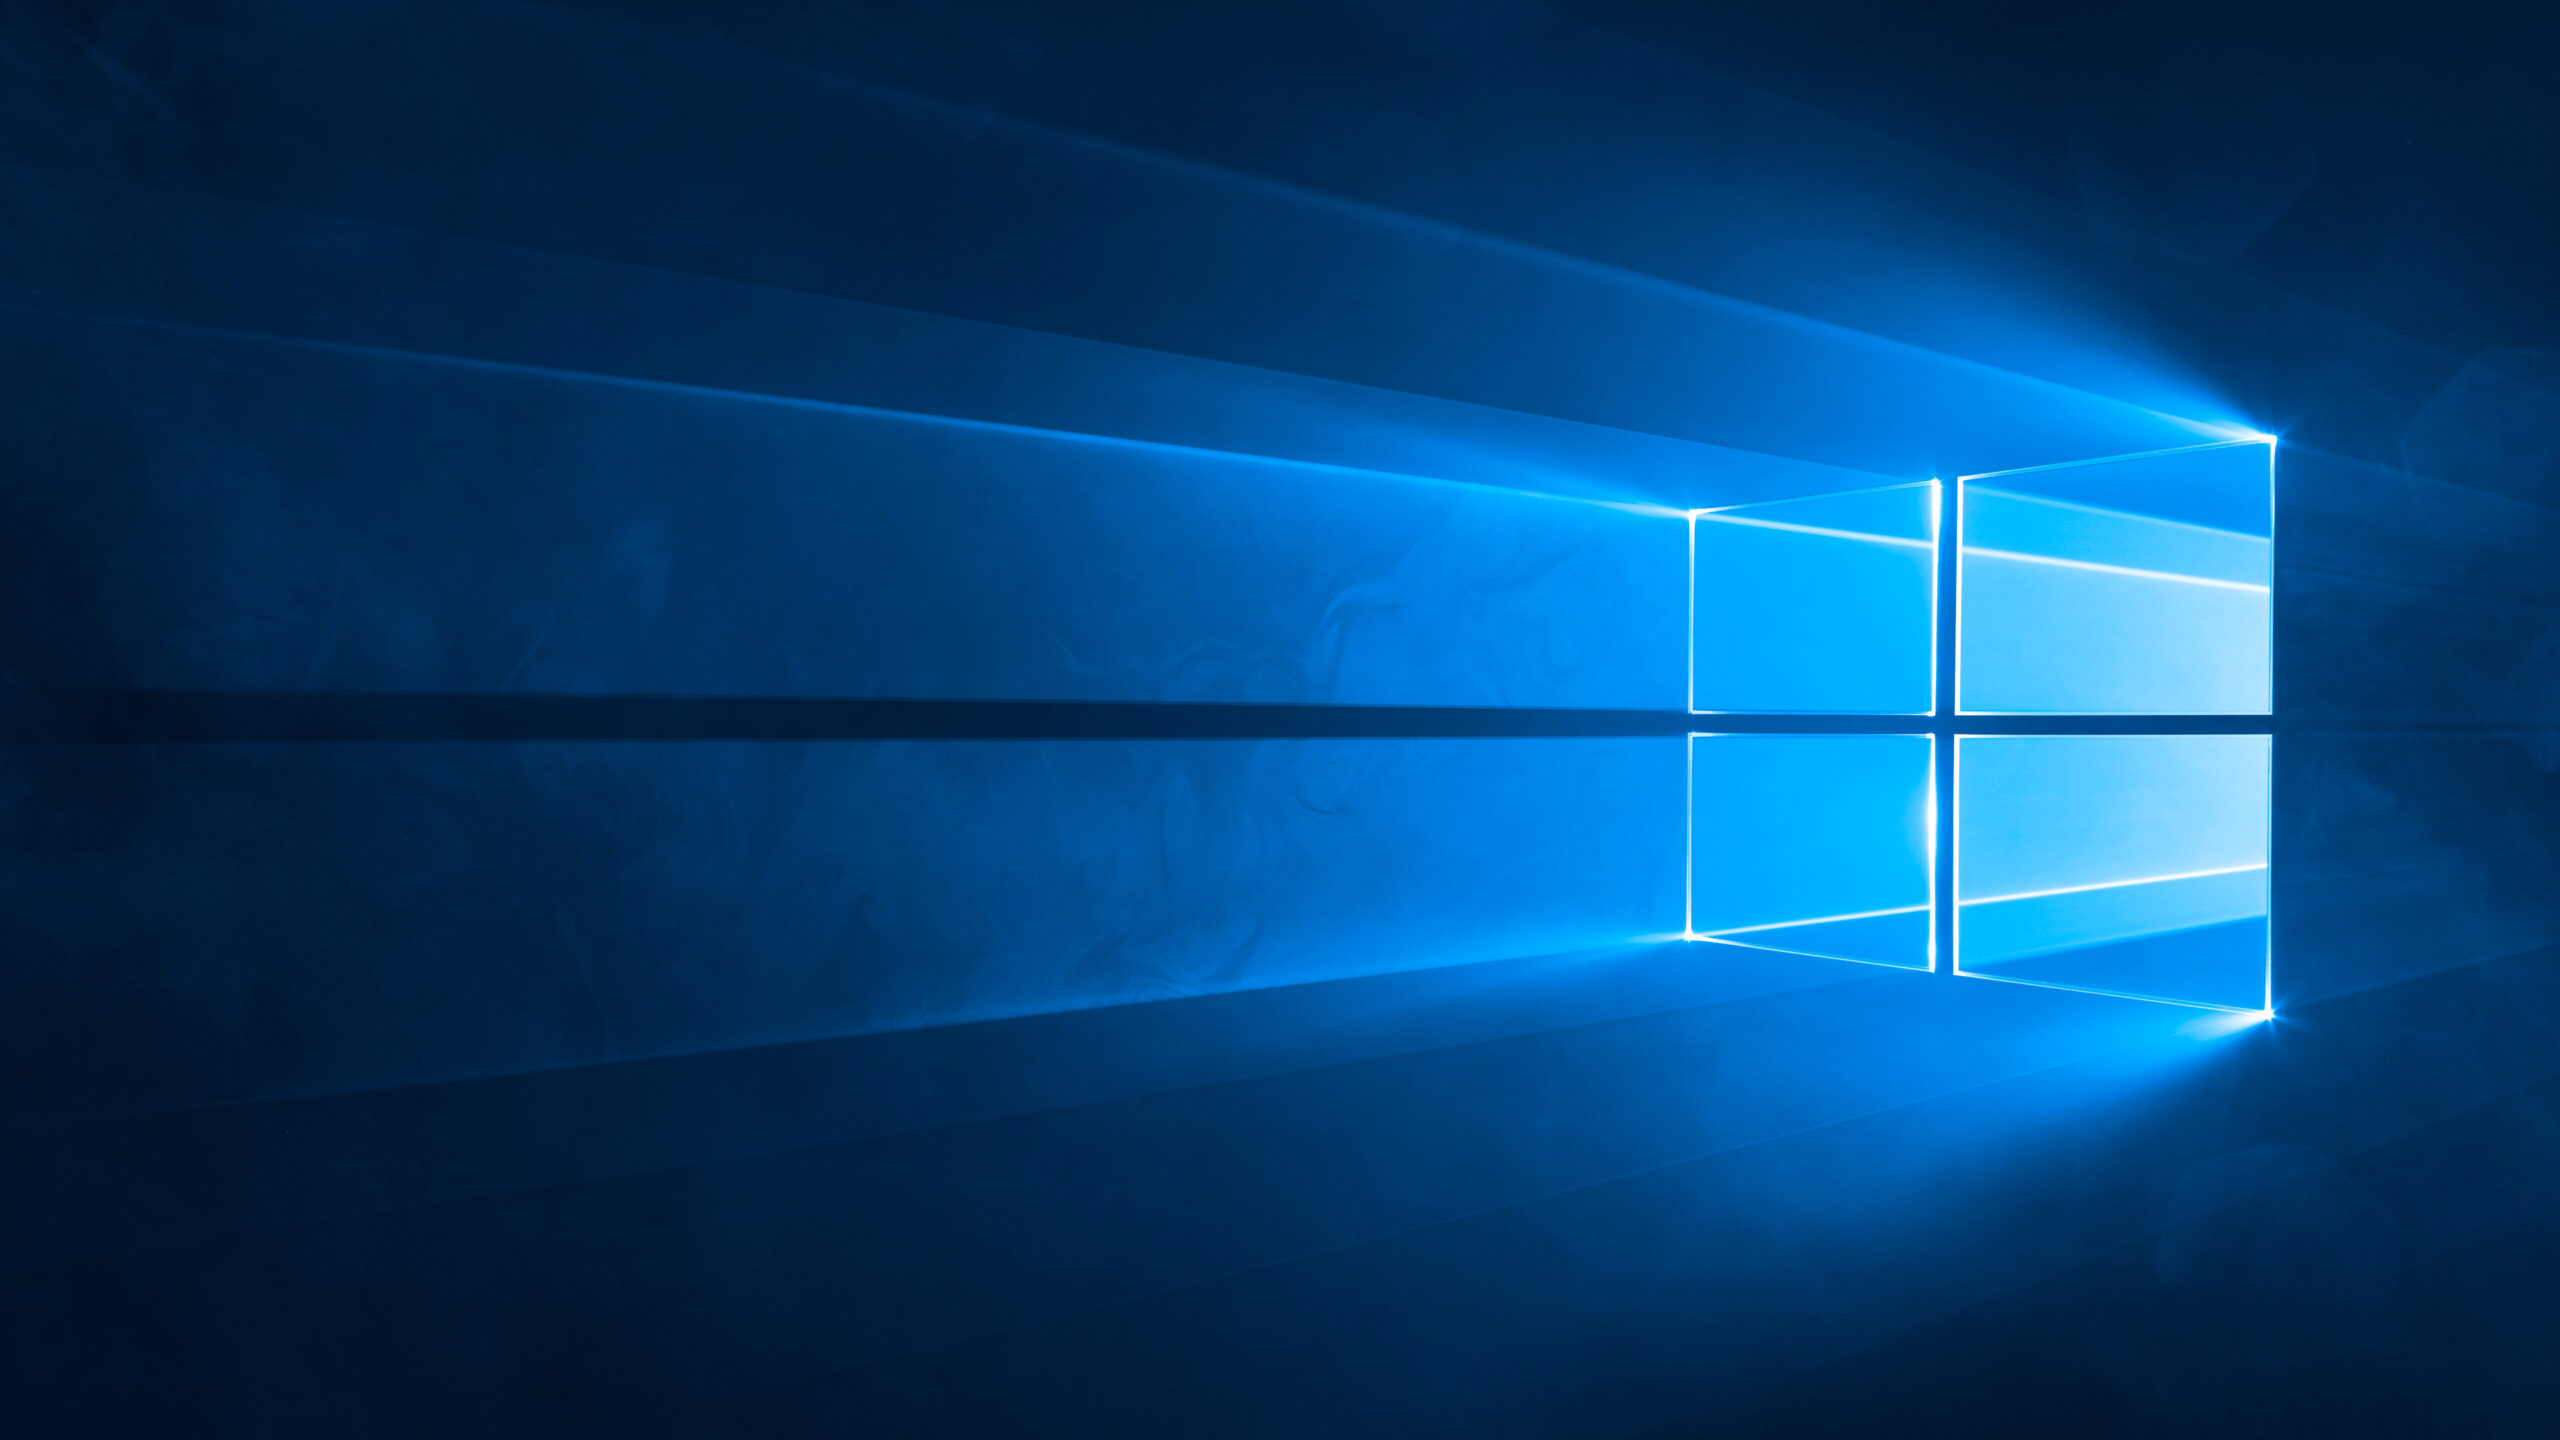 Windows 10 version 2004 finally reaches broad deployment phase 532104 2 scaled